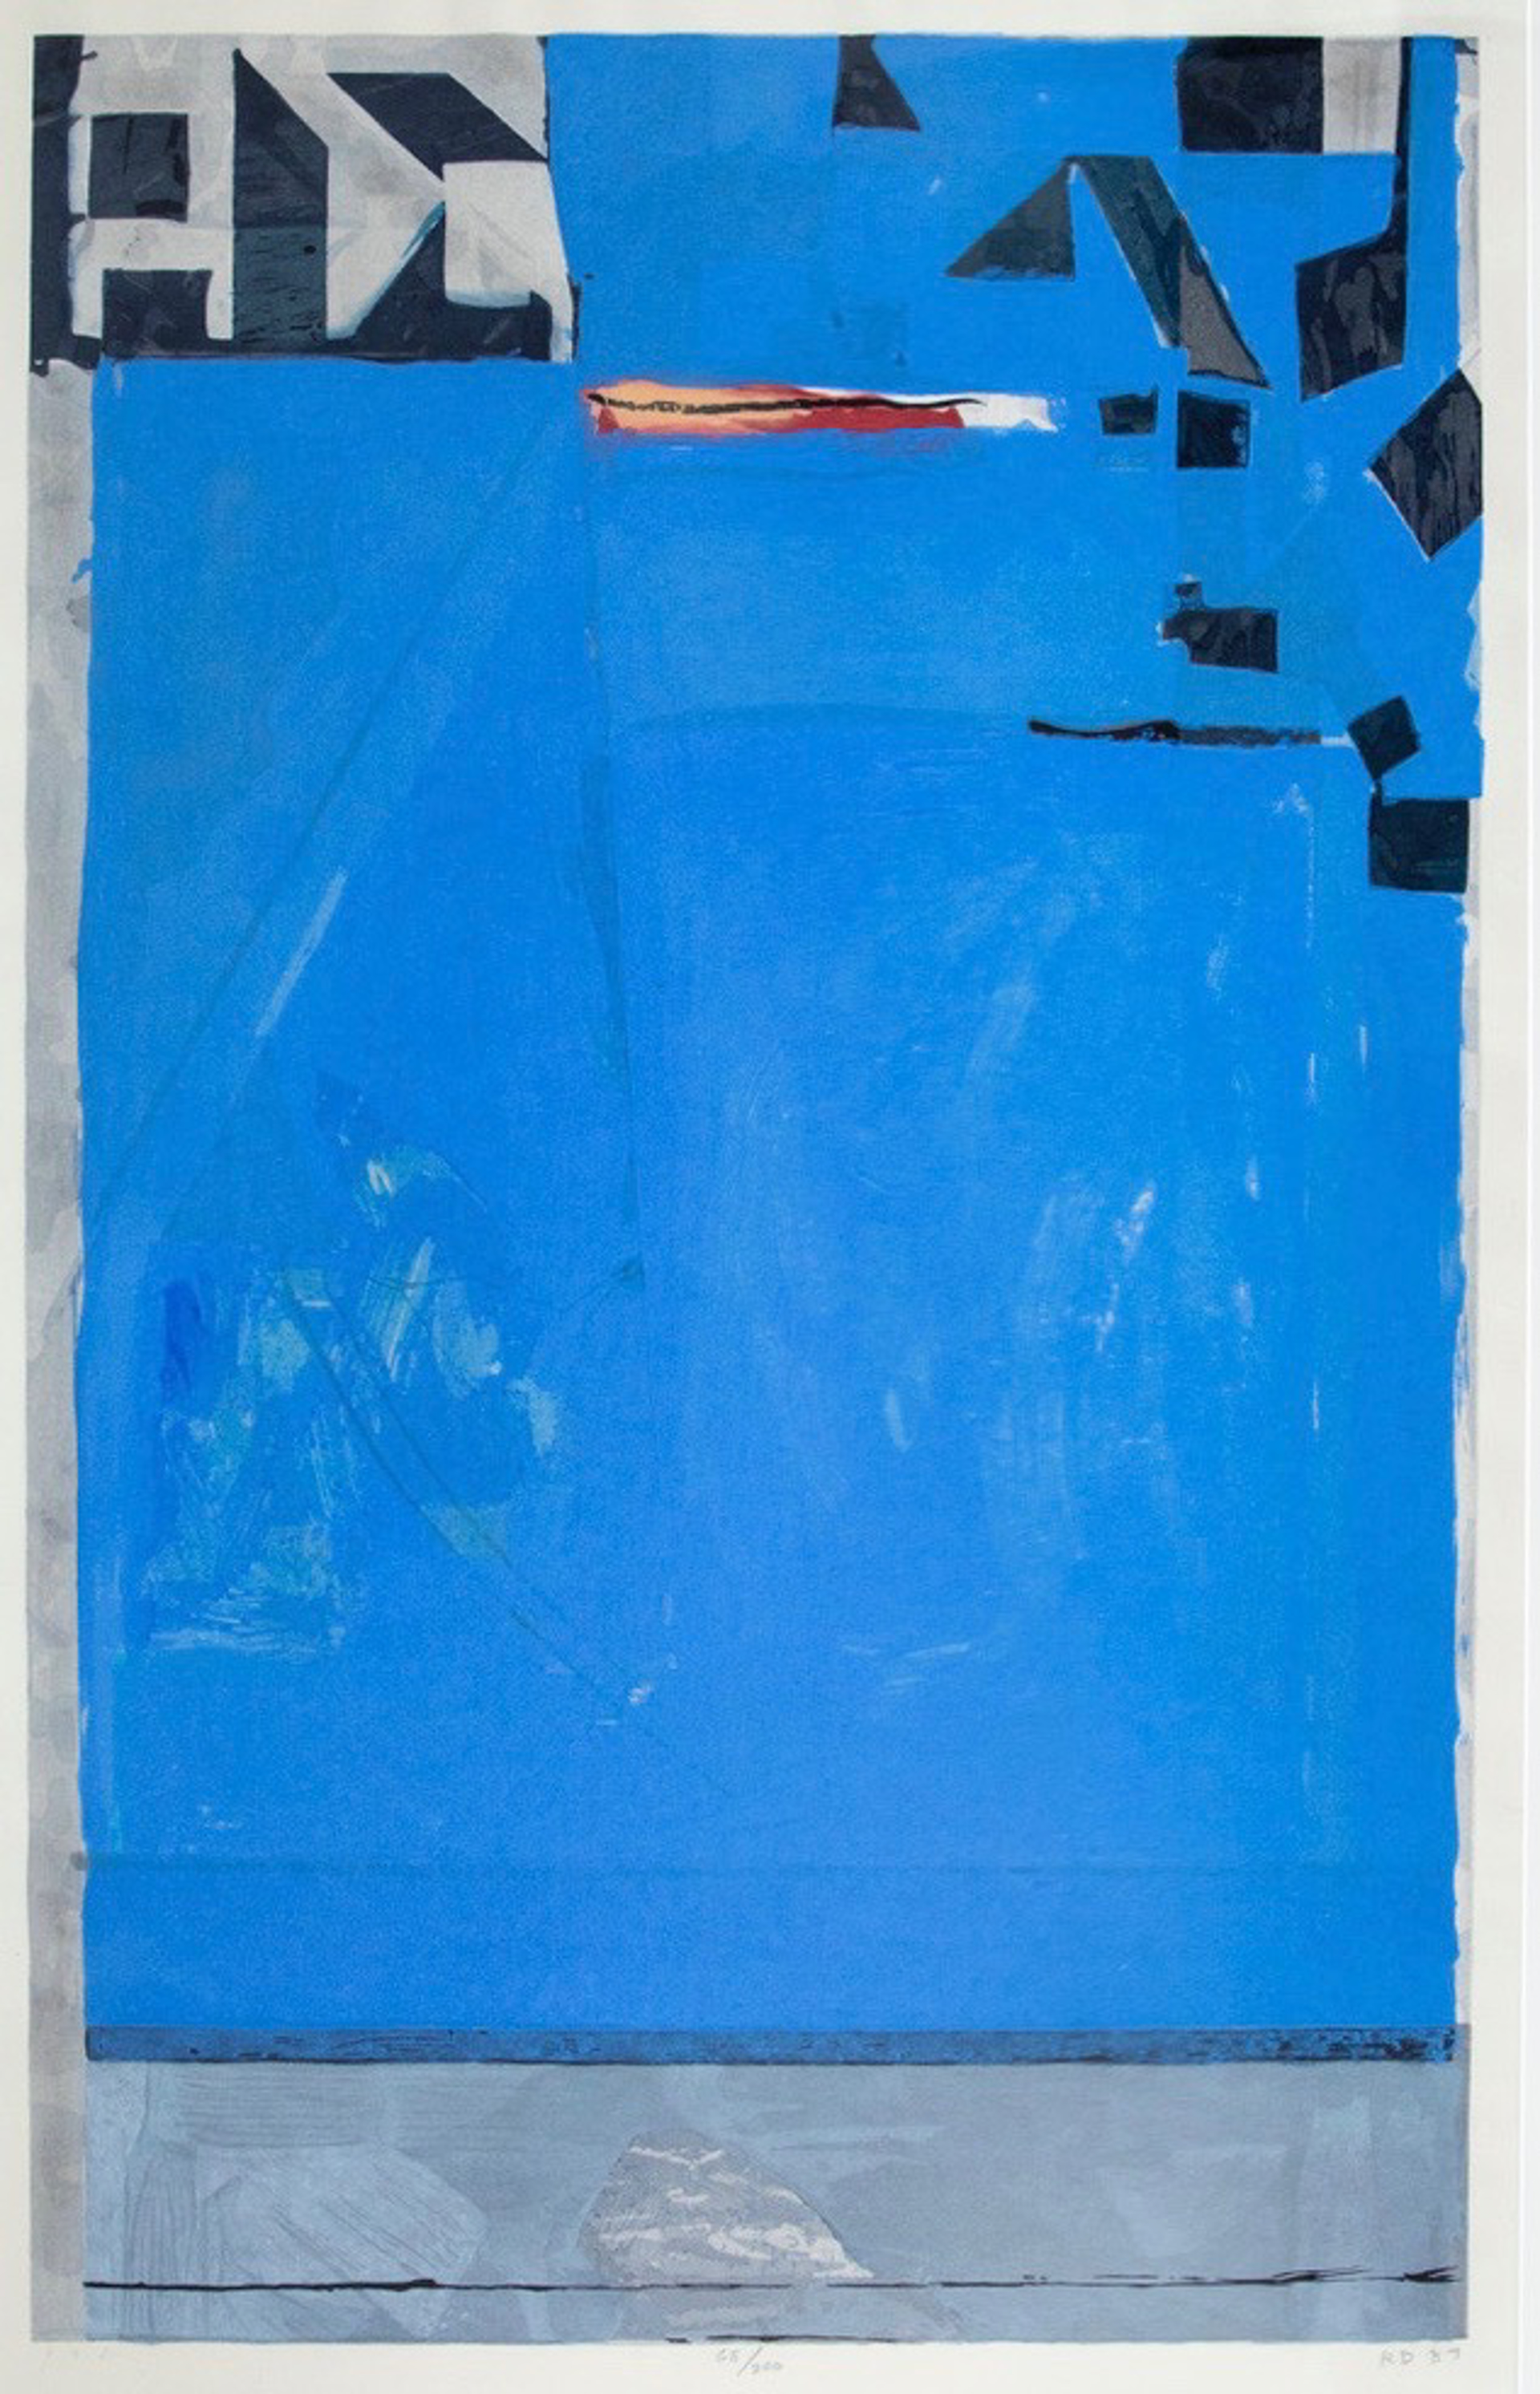 Blue with Red by Richard Diebenkorn, Jr. (1922-1993)